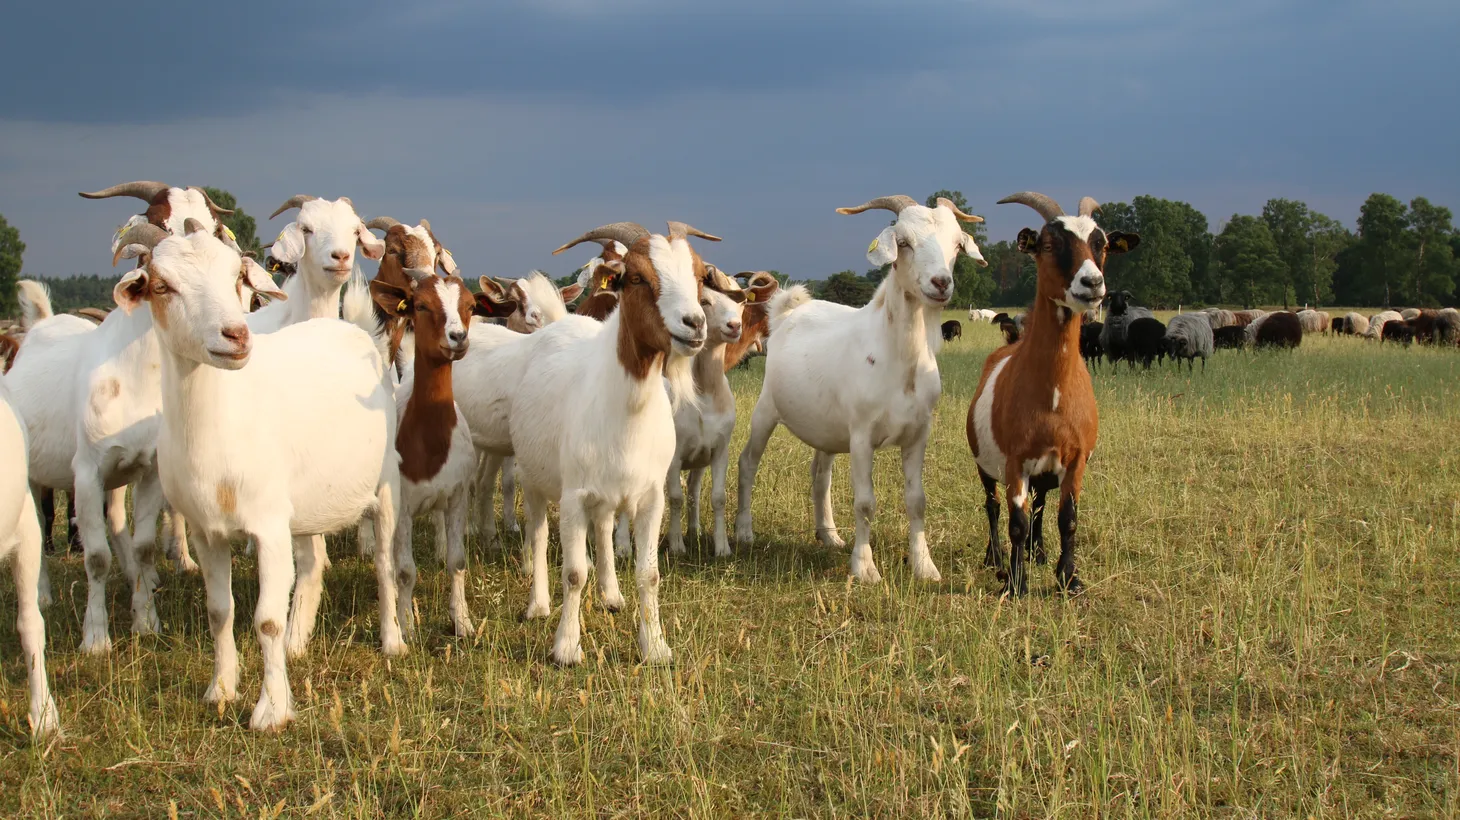 Goat grazing can be an environmentally-friendly alternative to the use of heavy machinery or herbicides for fire prevention.